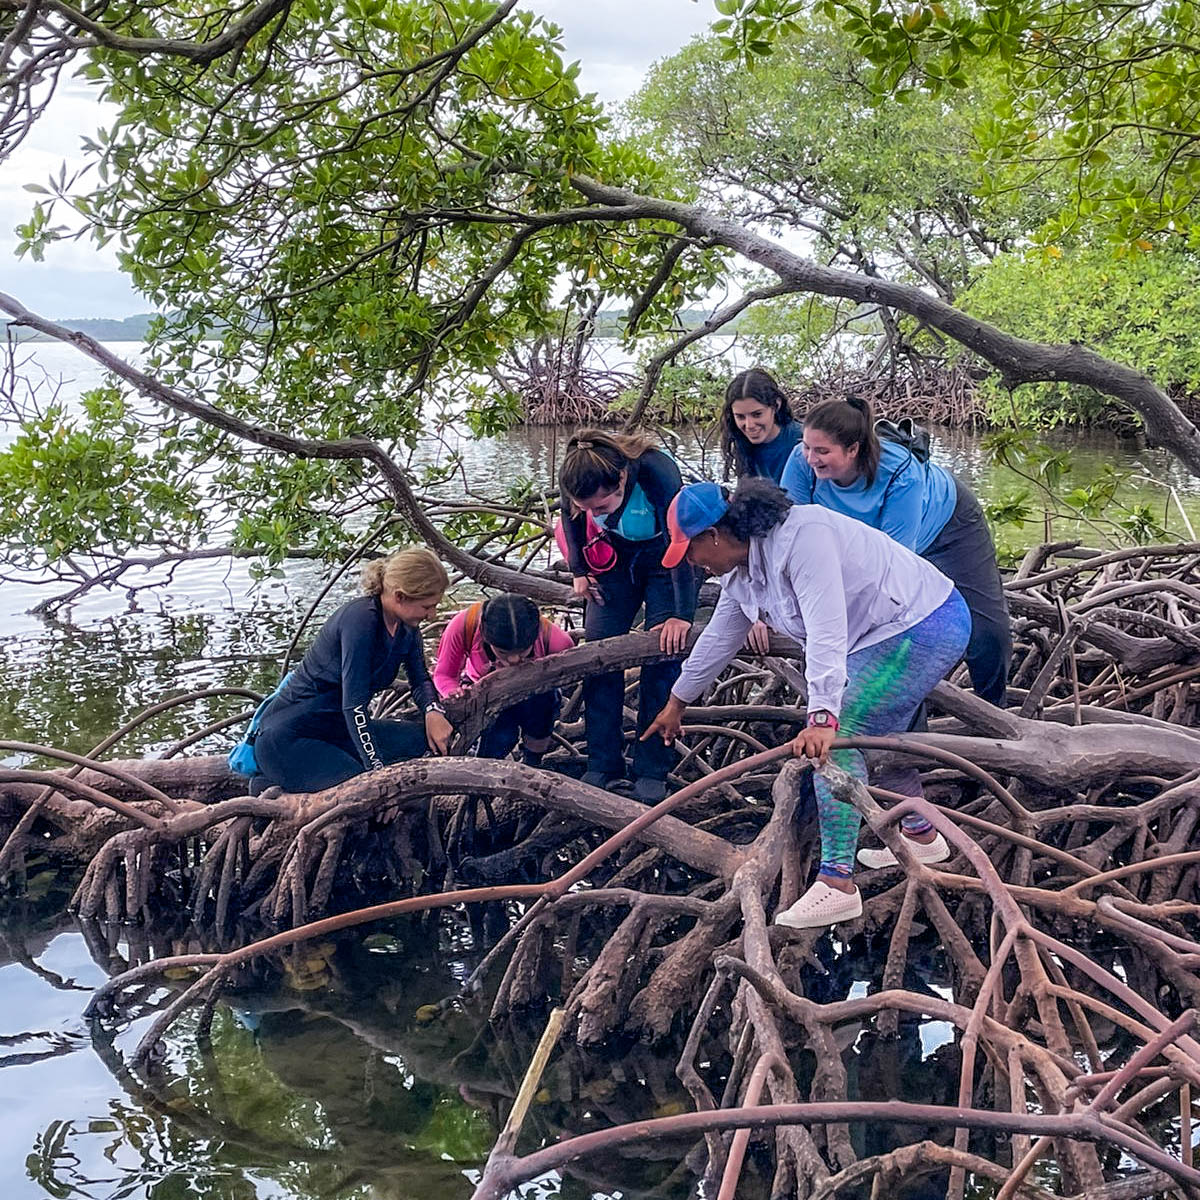 “Social science is not an ‘add on’ to #MarineConservation, it is an essential part of the equation” - Dr. Cinda Scott (@cindaseasworld) #OceanEquity #MangroveEquity @TheSFS Check out Cinda's new publication: link.springer.com/article/10.100…